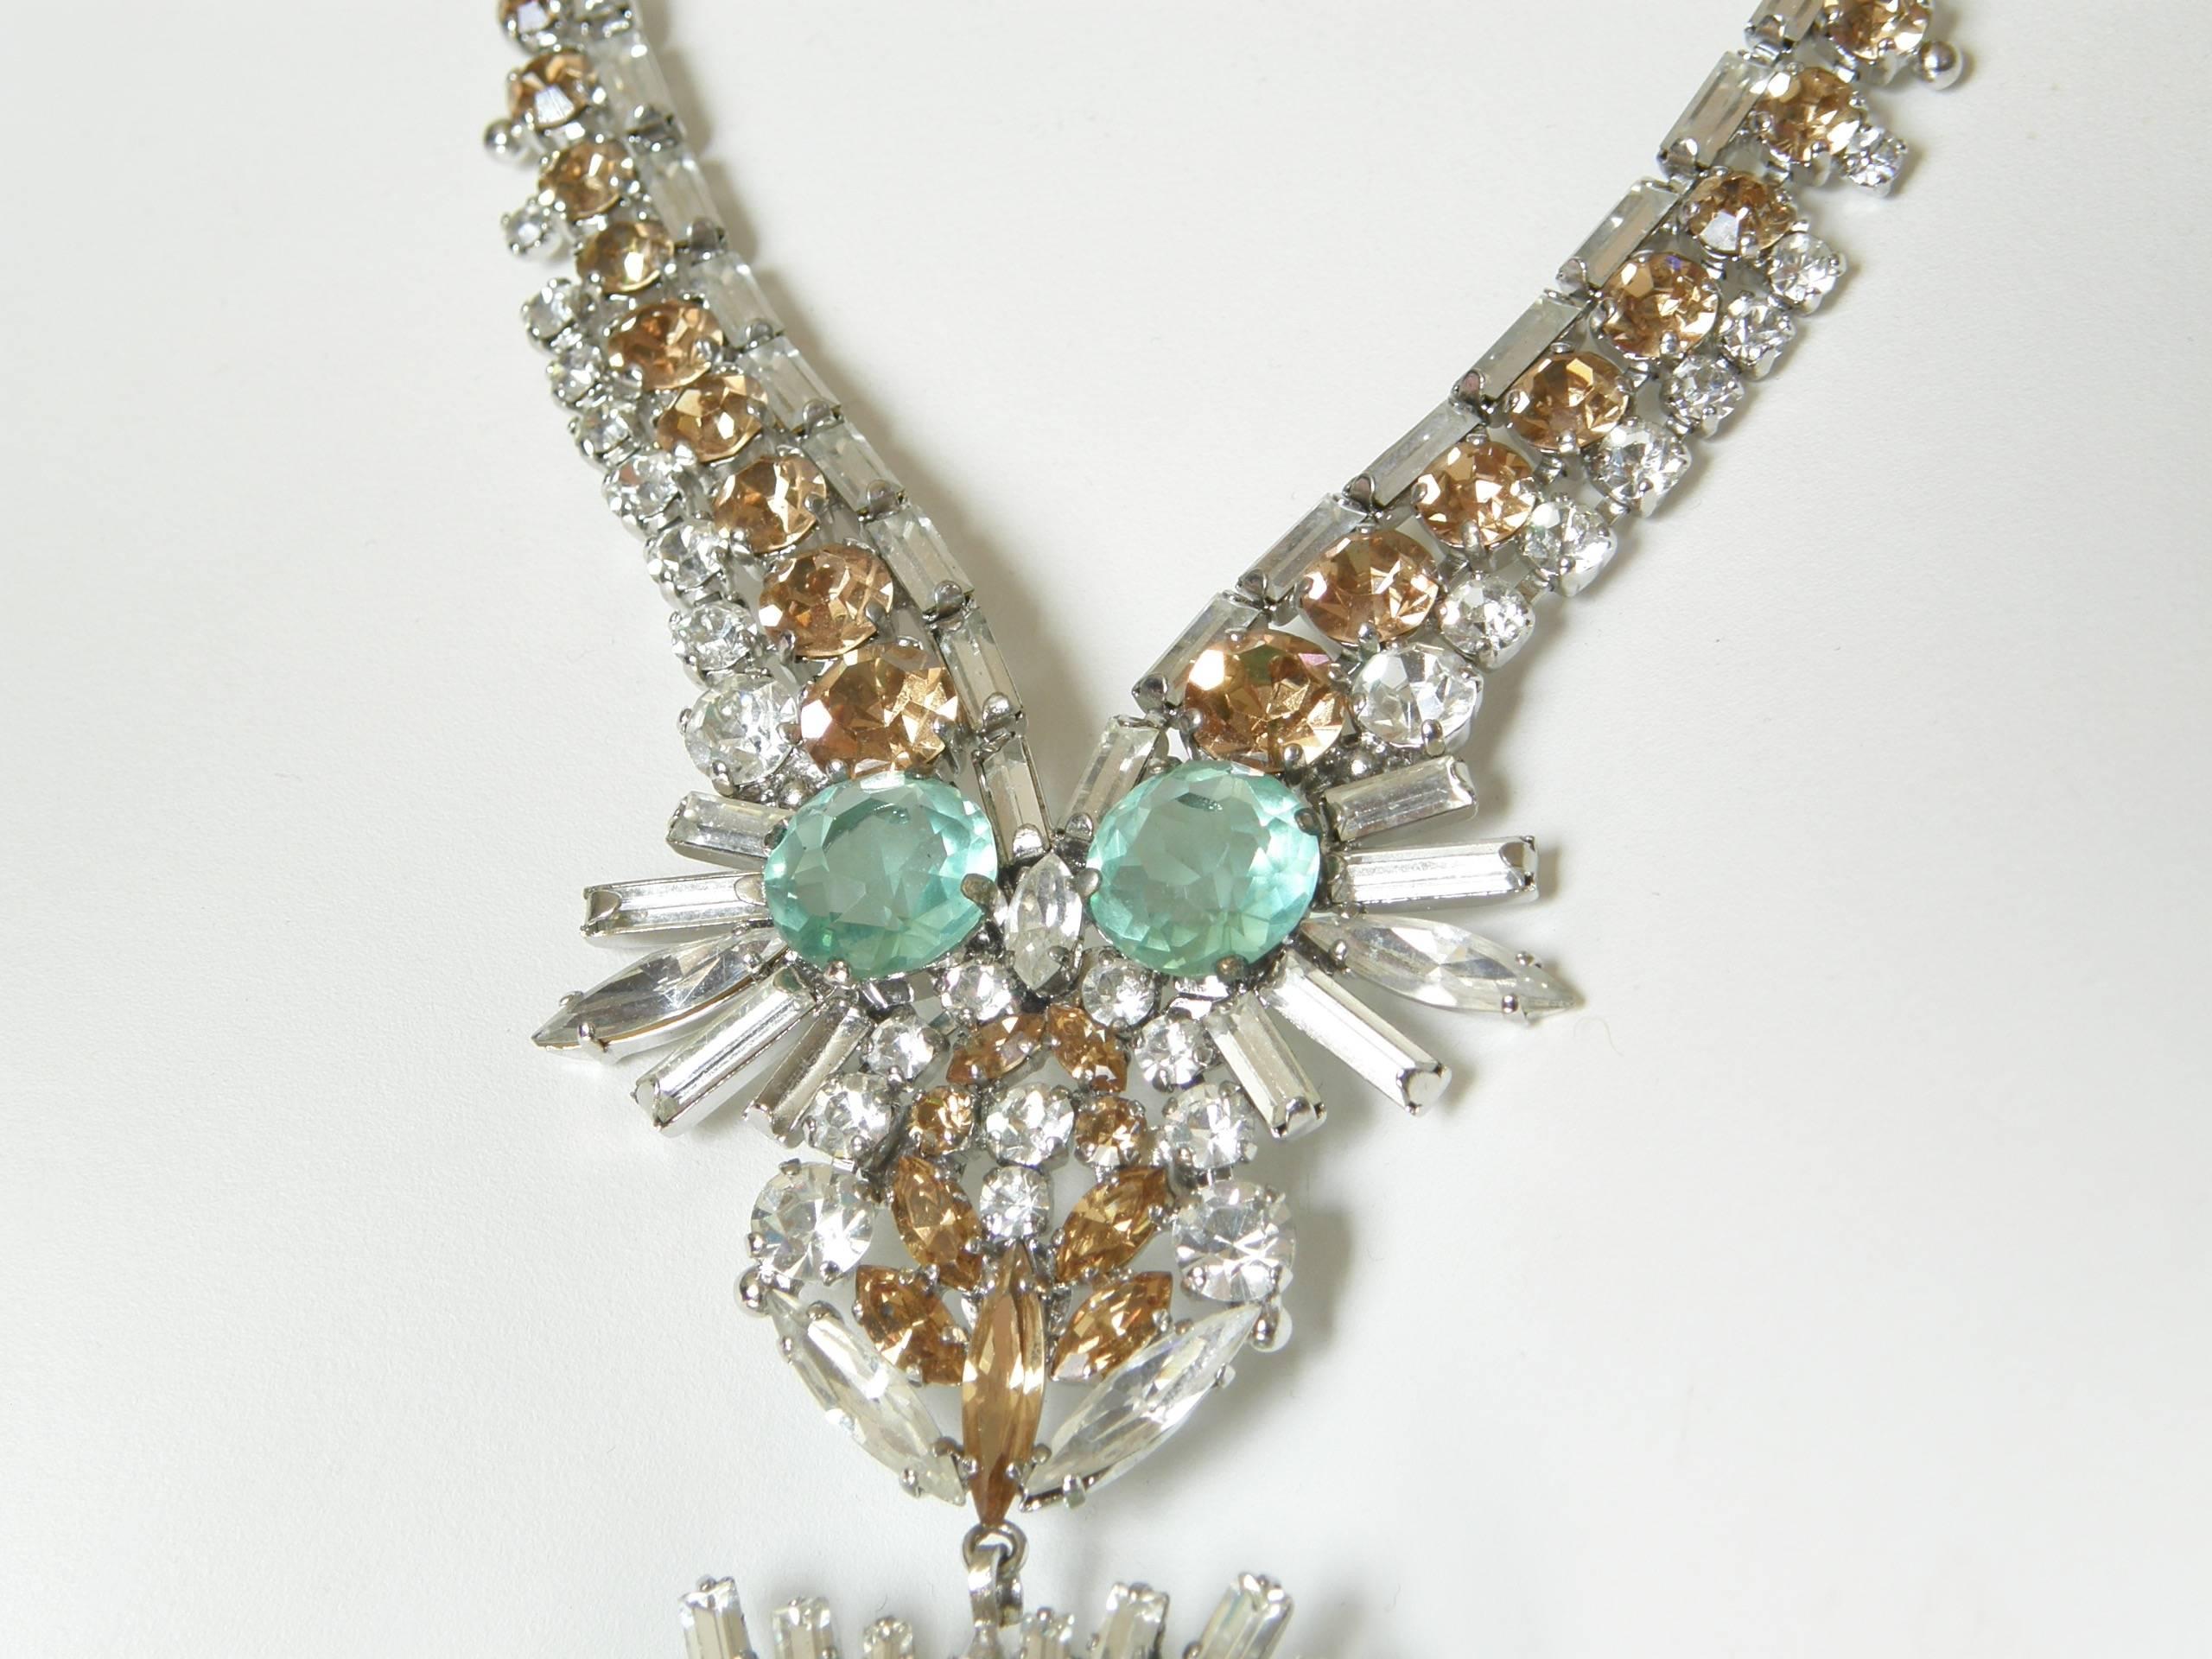 West German Rhinestone Necklace with Faux Emeralds Diamonds and Citrines 2